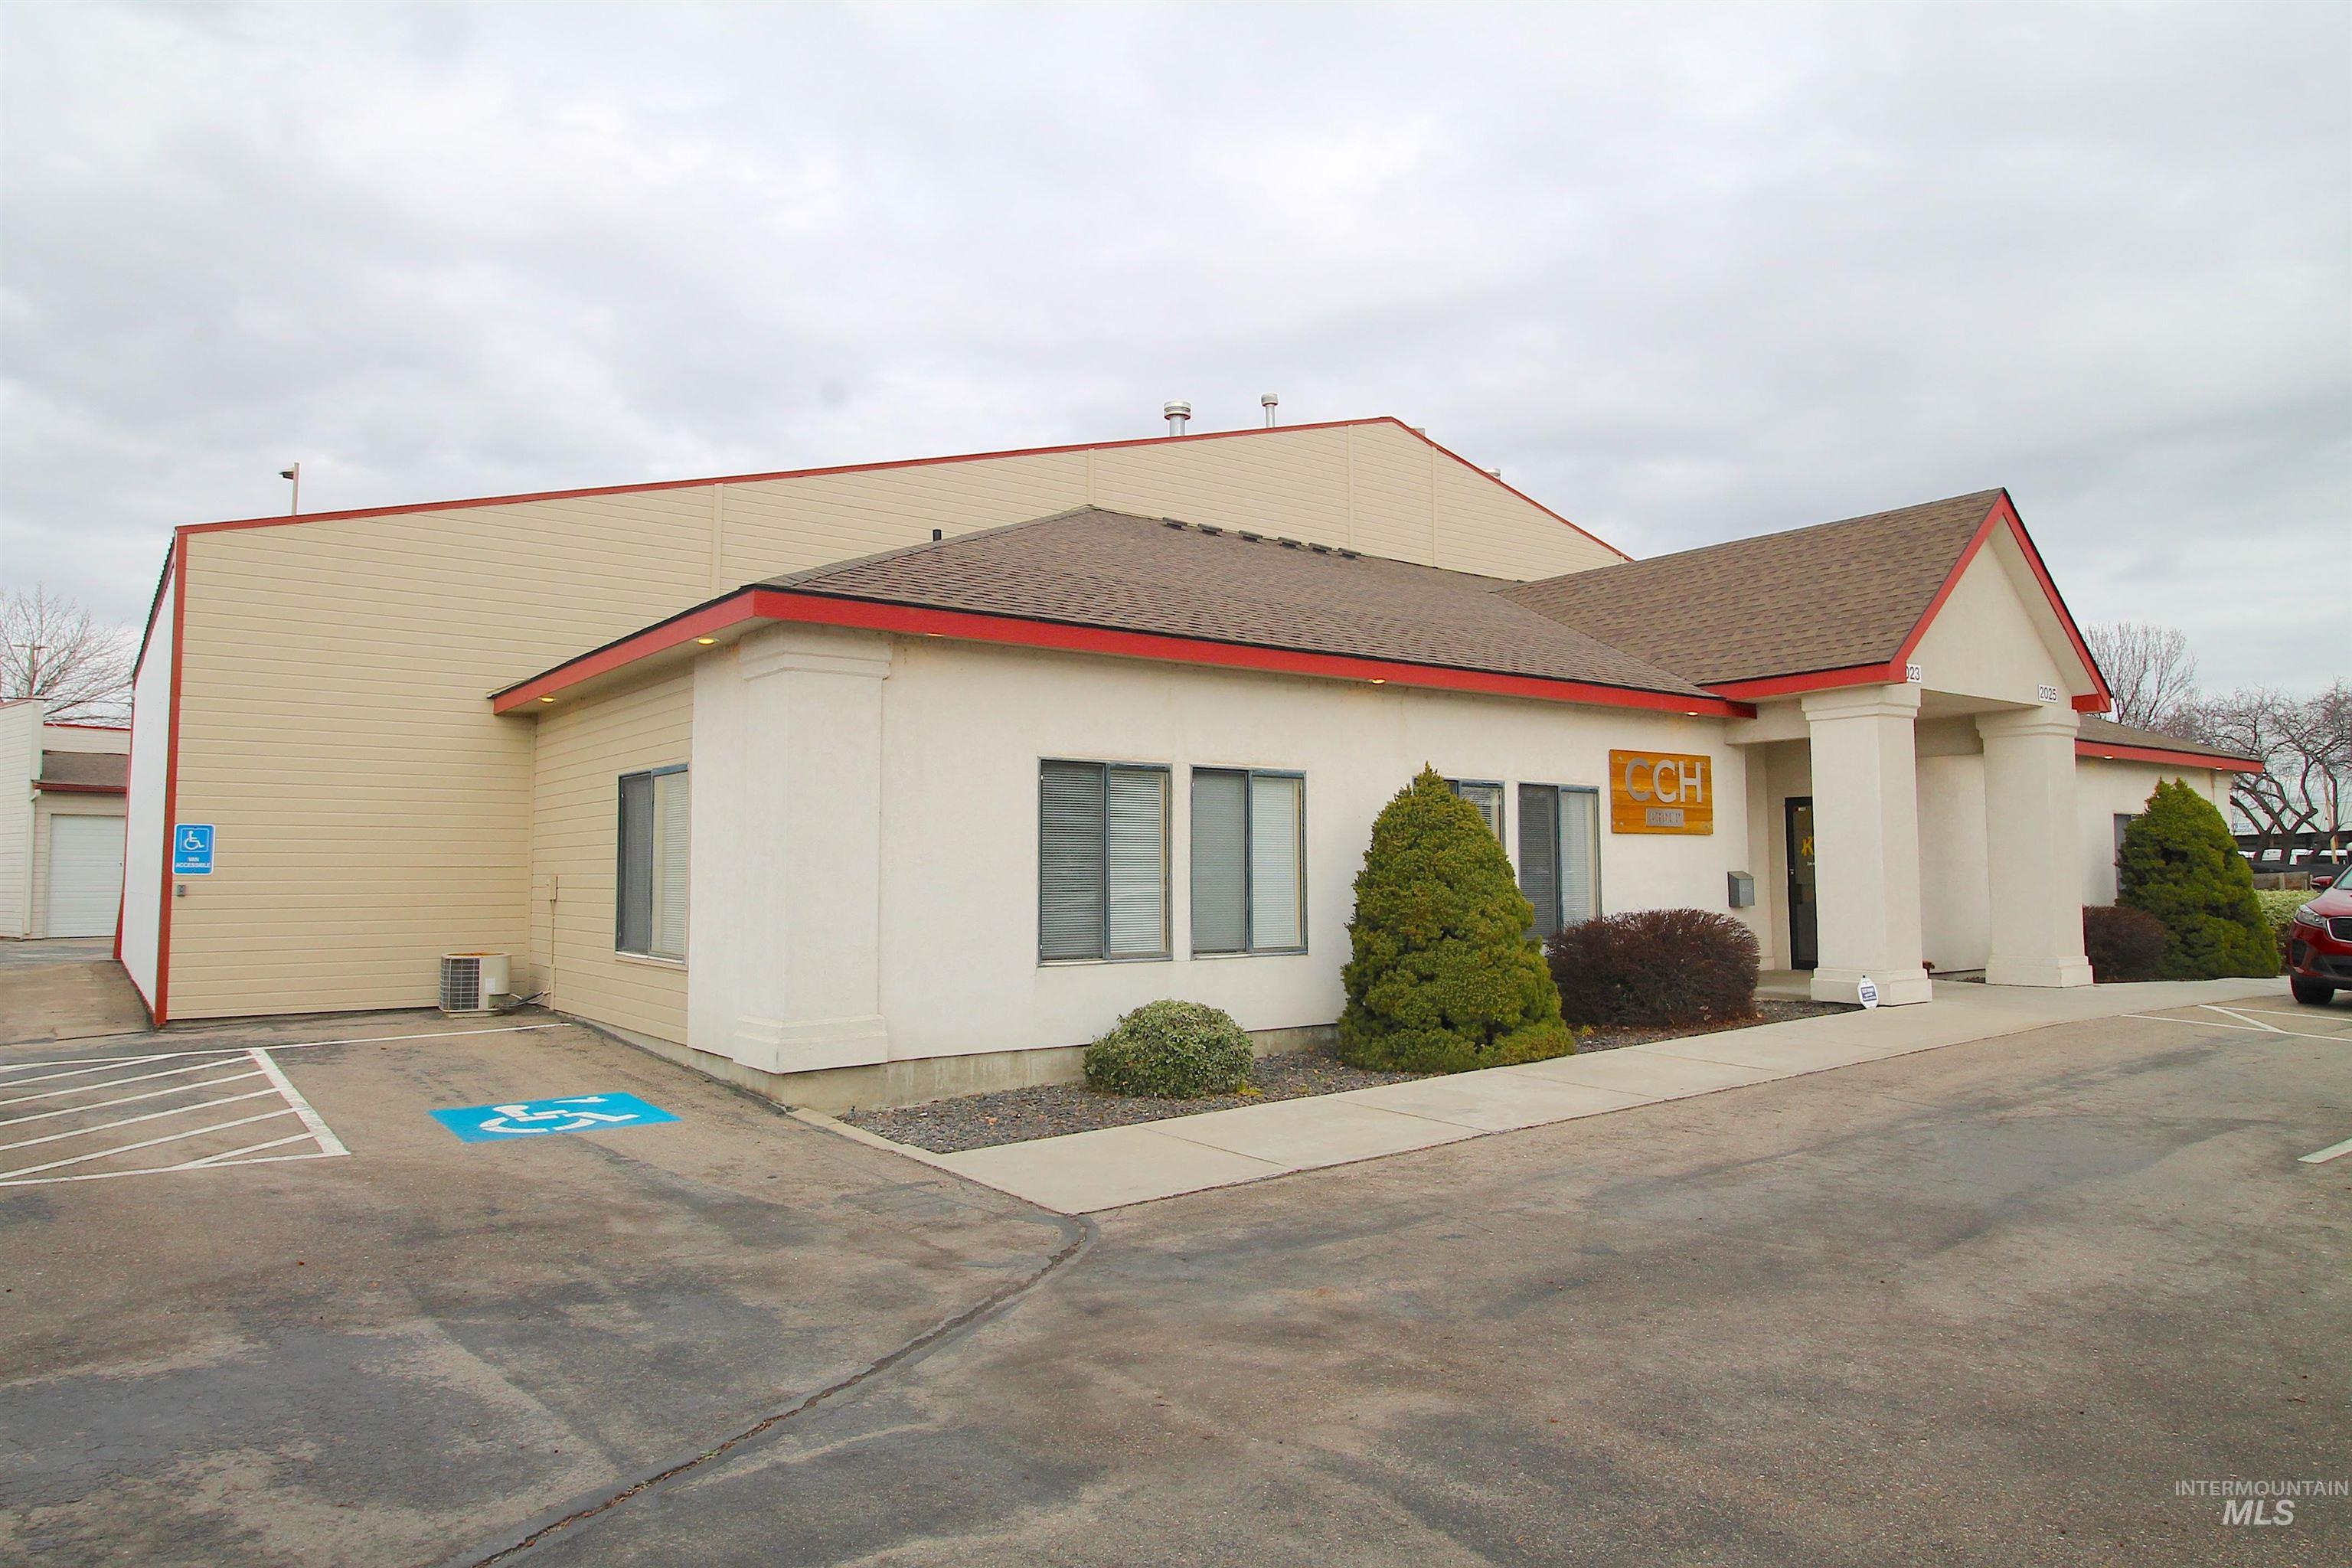 2023/2025 N Bingham, Nampa, Idaho 83651, Business/Commercial For Sale, Price $1,449,000,MLS 98903113